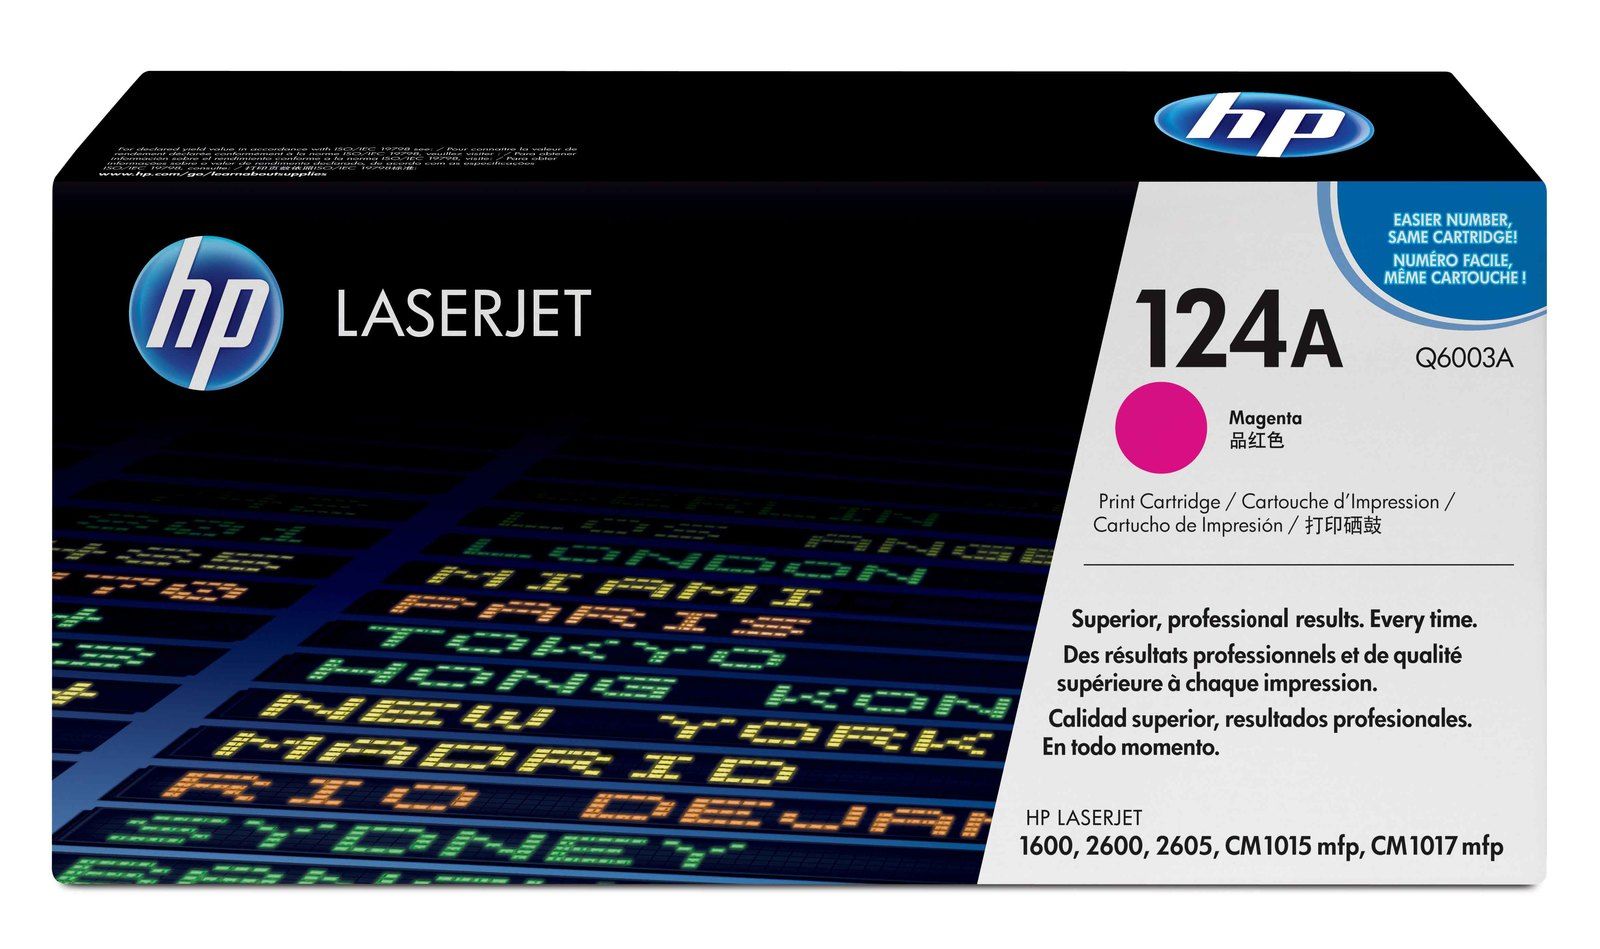 Related to HP COLOUR LASERJET 2600N: Q6003A